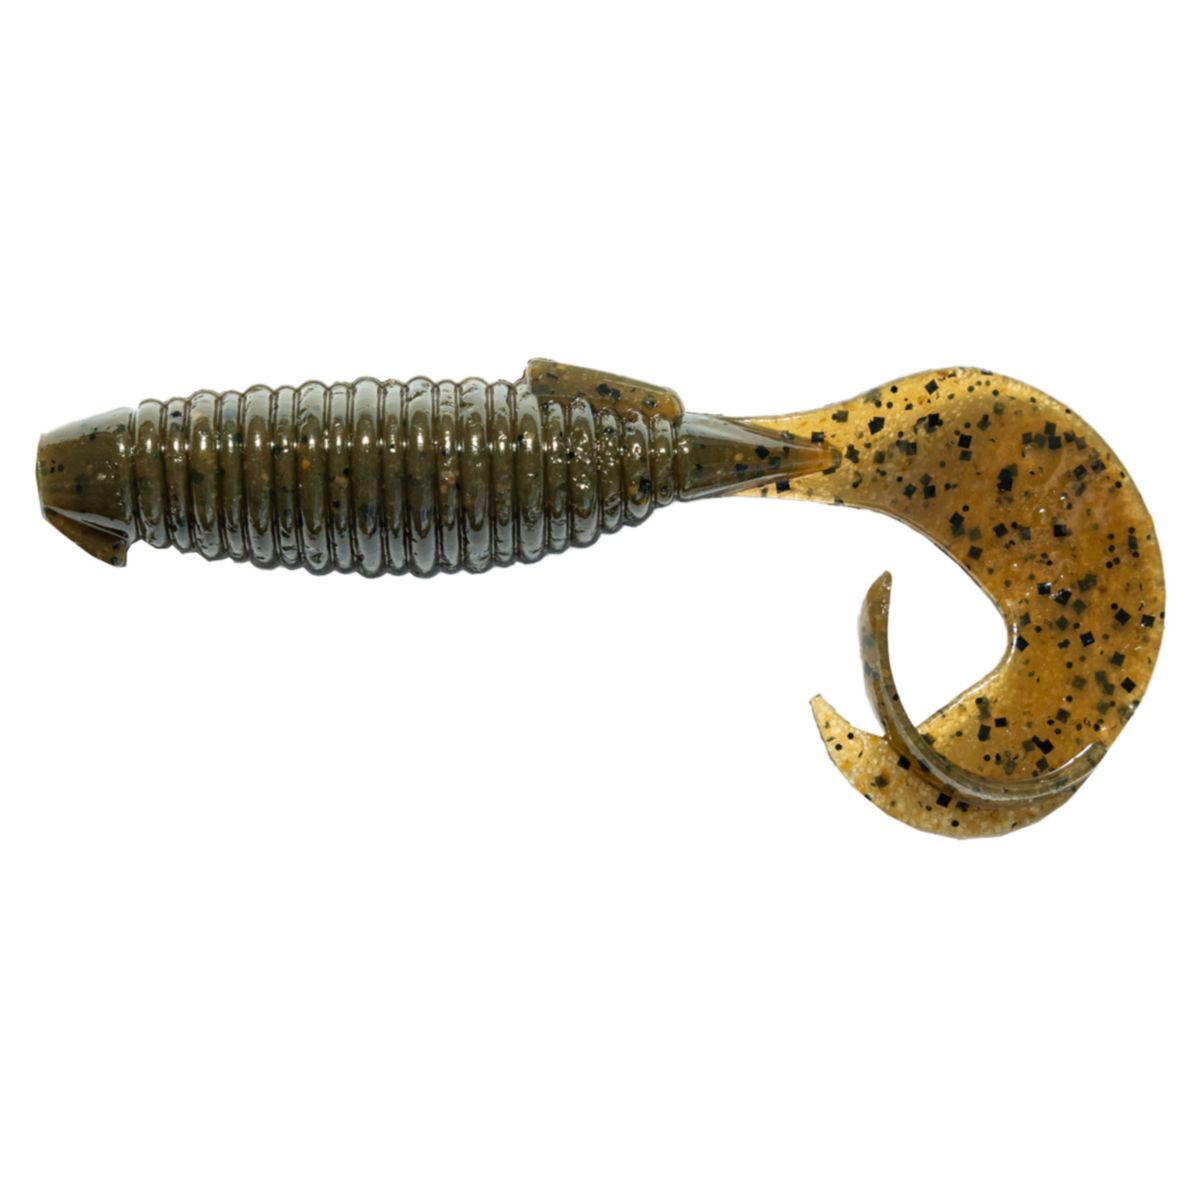  Keitech SW4436 Artificial Fishing Bait, Black Shad, 4 :  Sports & Outdoors